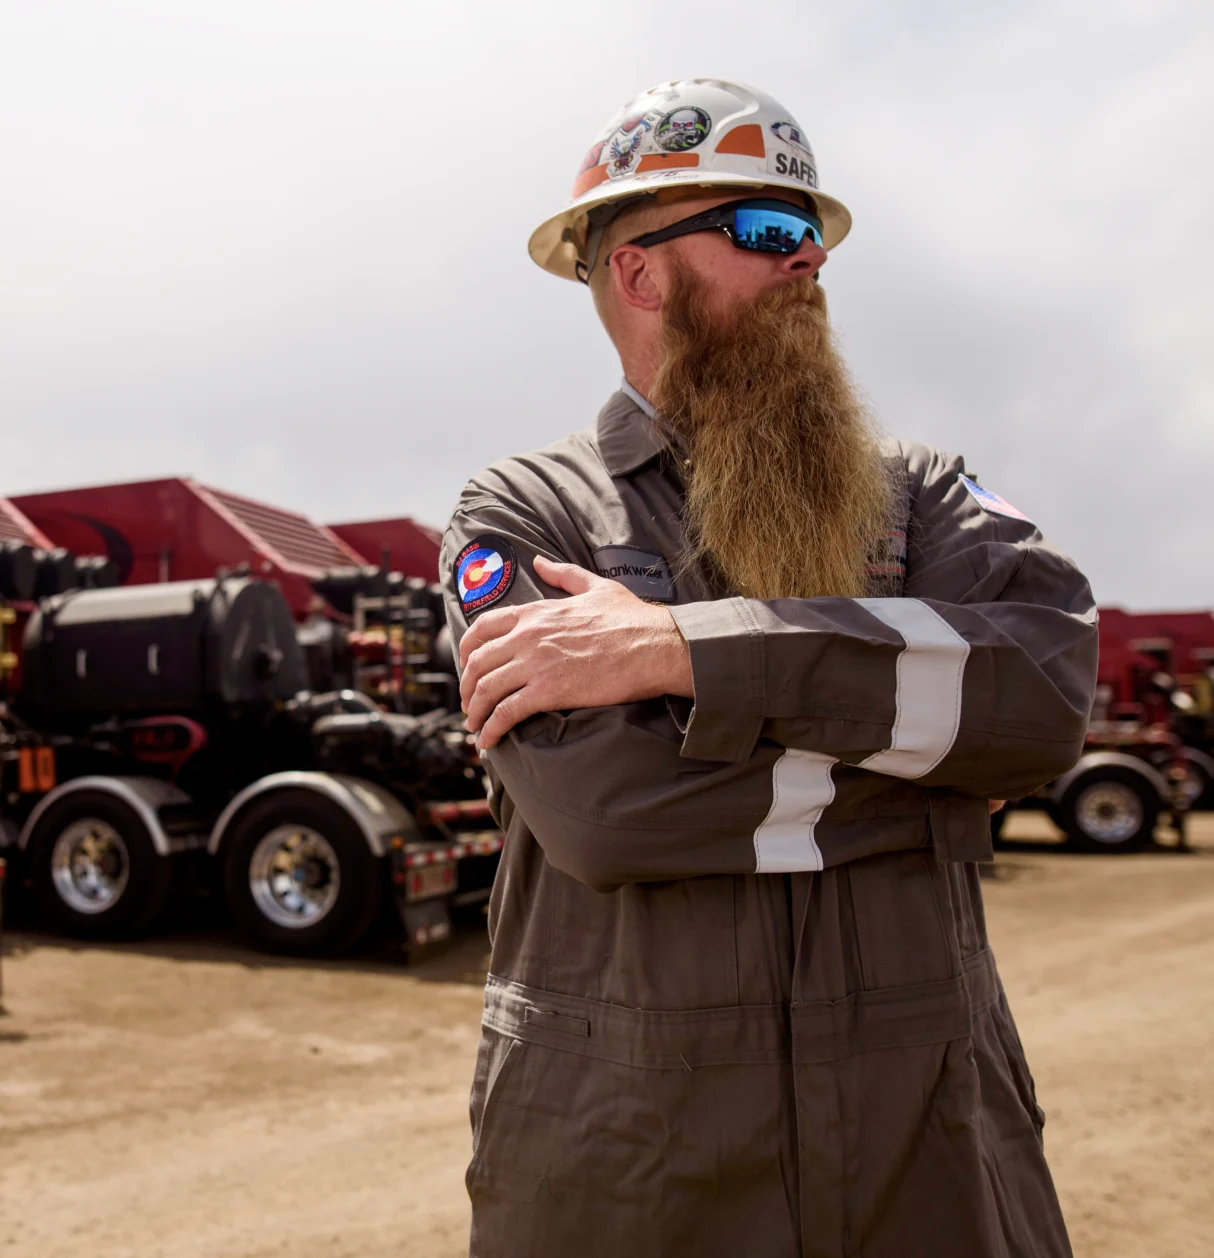 A Liberty Energy employee standing with crossed arms and looking off into the distance with a row of oil tankers behind him.